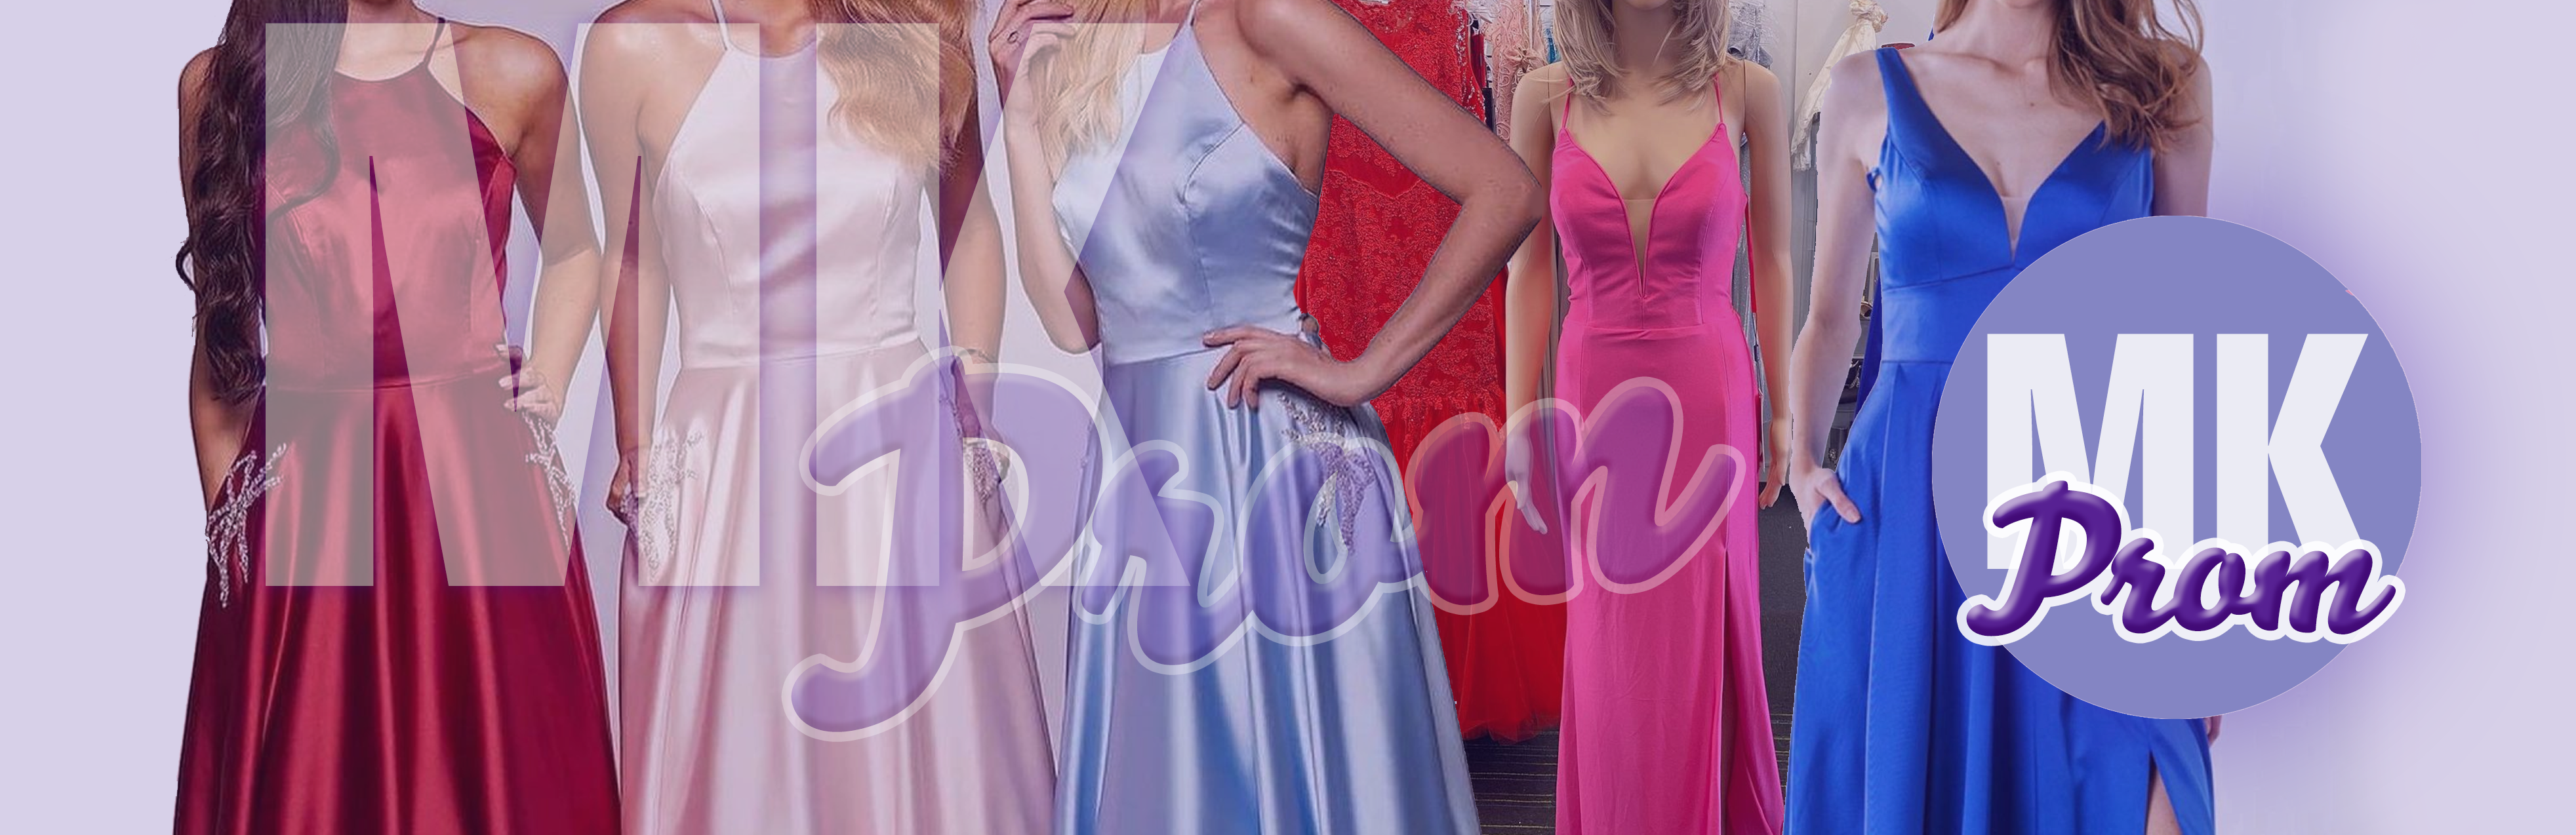 MK Prom in Bletchley, Milton Keyens for great evening gowns, prom dresses and formal wear